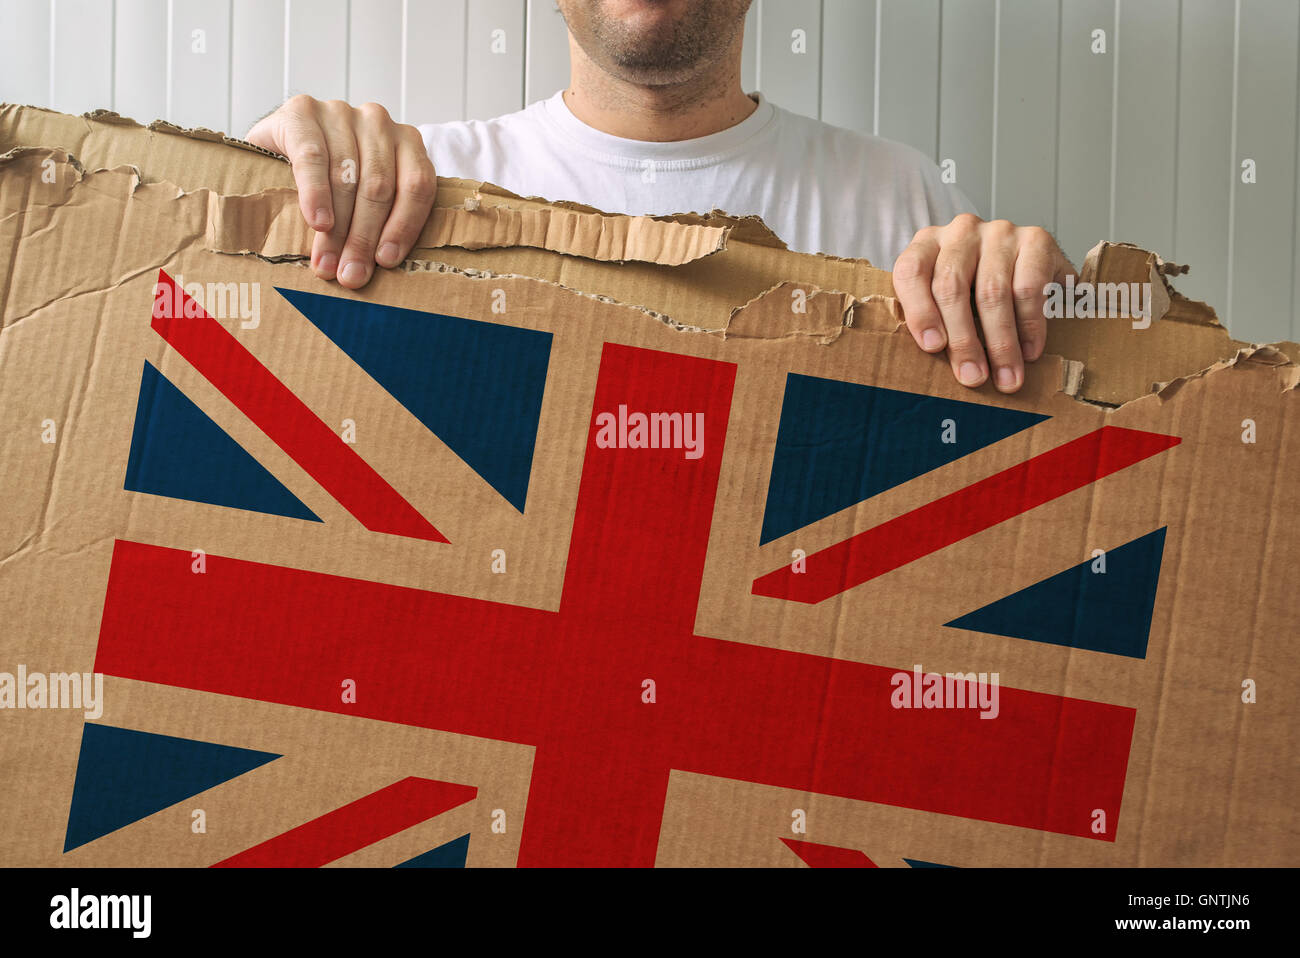 Man holding cardboard with United Kingdom flag printed, adult male person supporting Great Britain Stock Photo